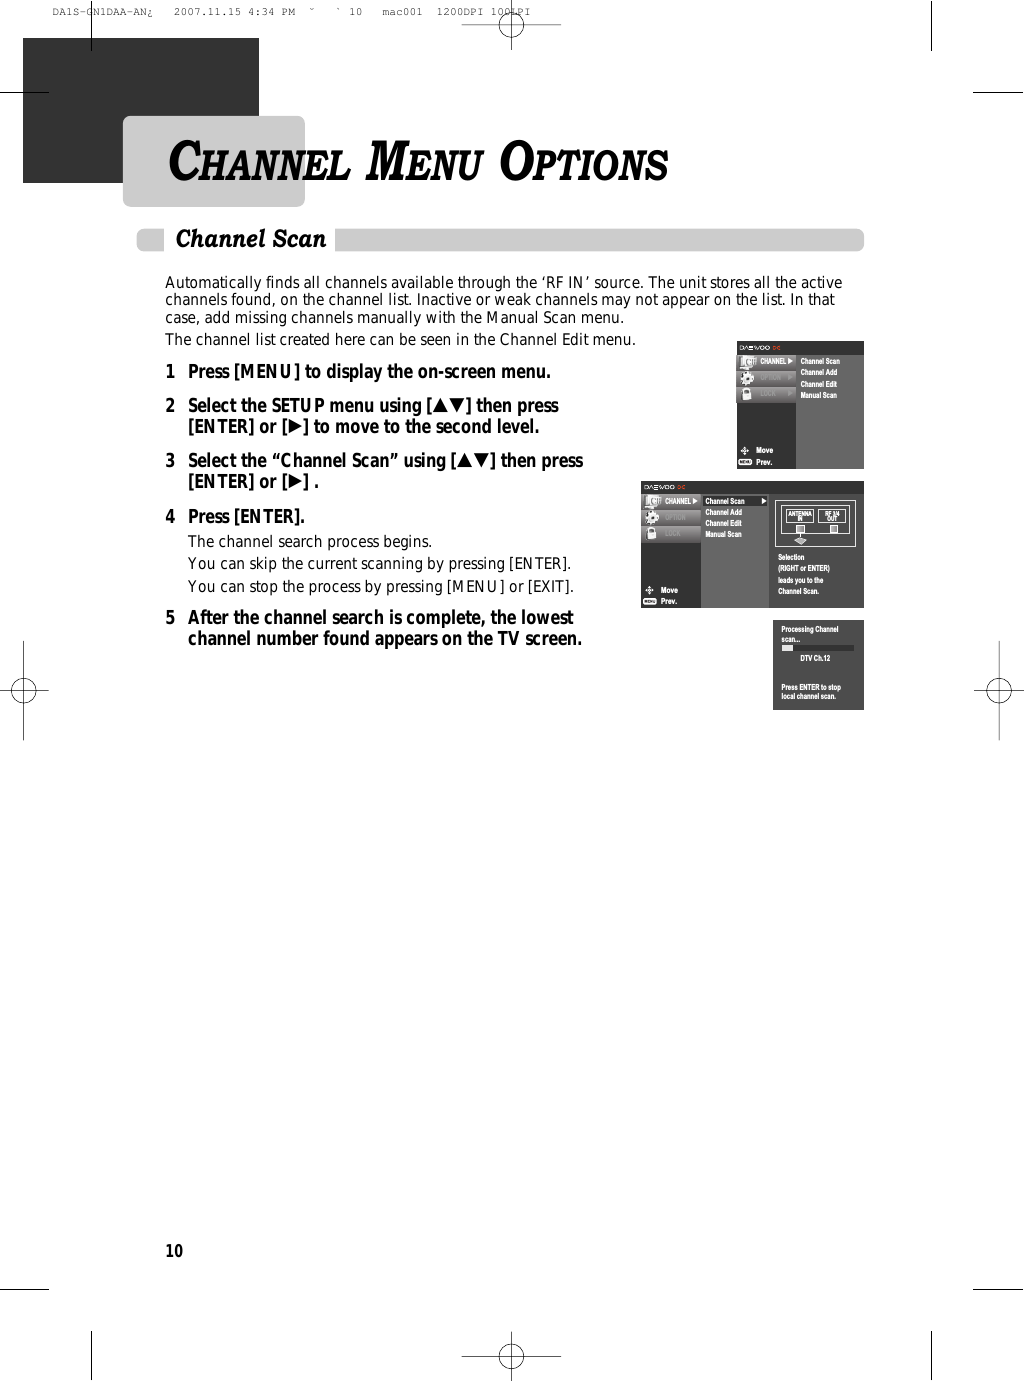 10Automatically finds all channels available through the ‘RF IN’ source. The unit stores all the activechannels found, on the channel list. Inactive or weak channels may not appear on the list. In thatcase, add missing channels manually with the Manual Scan menu.The channel list created here can be seen in the Channel Edit menu.1 Press [MENU] to display the on-screen menu.2 Select the SETUP menu using […†] then press [ENTER] or [√] to move to the second level.3 Select the “Channel Scan” using […†] then press [ENTER] or [√] .4 Press [ENTER].The channel search process begins.You can skip the current scanning by pressing [ENTER].You can stop the process by pressing [MENU] or [EXIT].5  After the channel search is complete, the lowest channel number found appears on the TV screen.Channel ScanMovePrev.CHANNEL √OPTIONLOCK√Channel ScanChannel AddChannel EditManual ScanSelection(RIGHT or ENTER)leads you to theChannel Scan.ANTENNAIN RF 3/4OUTProcessing Channelscan...DTV Ch.12Press ENTER to stoplocal channel scan.CHANNEL MENU OPTIONSMovePrev.CHANNEL √OPTION √LOCK √Channel ScanChannel AddChannel EditManual ScanDA1S-GN1DAA-AN¿   2007.11.15 4:34 PM  ˘ ` 10   mac001  1200DPI 100LPI